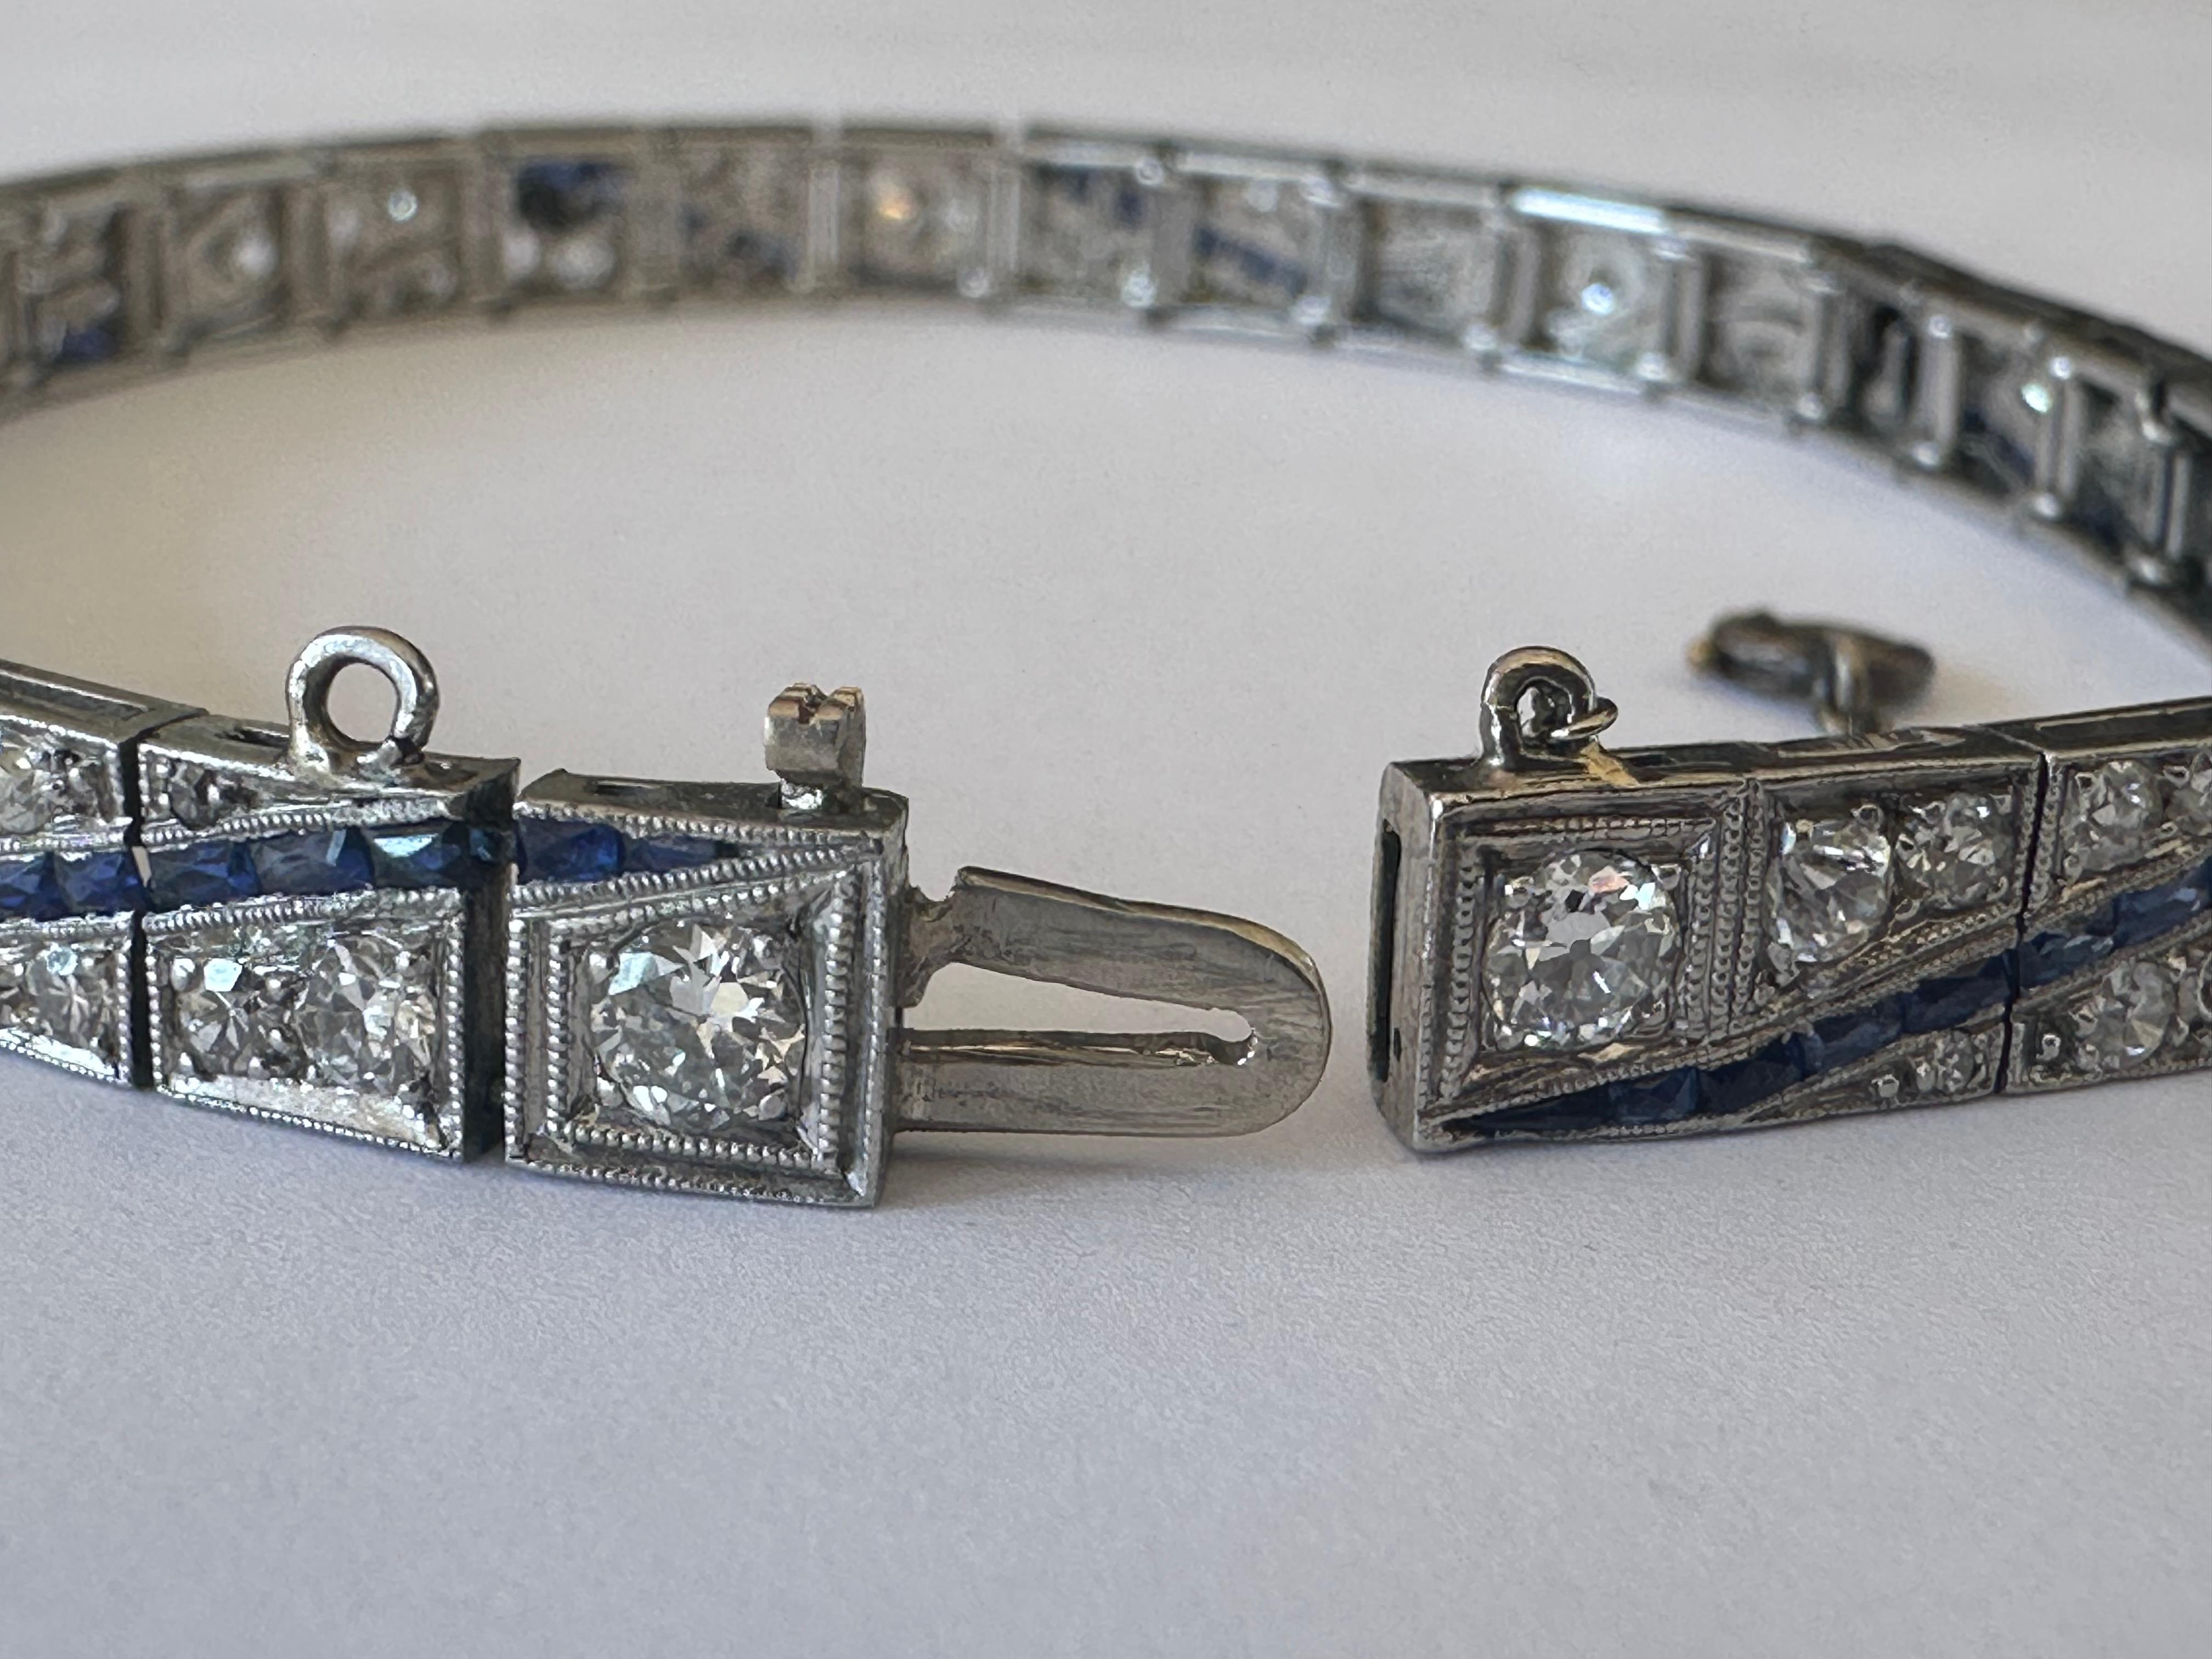 Crafted in the 1920s, this classic Art Deco bracelet features approximately 4.00 carats of Old European cut and single cut diamonds, H color, VS/SI clarity complemented with baguette-shaped calibre-set blue sapphires throughout. Set in platinum. 